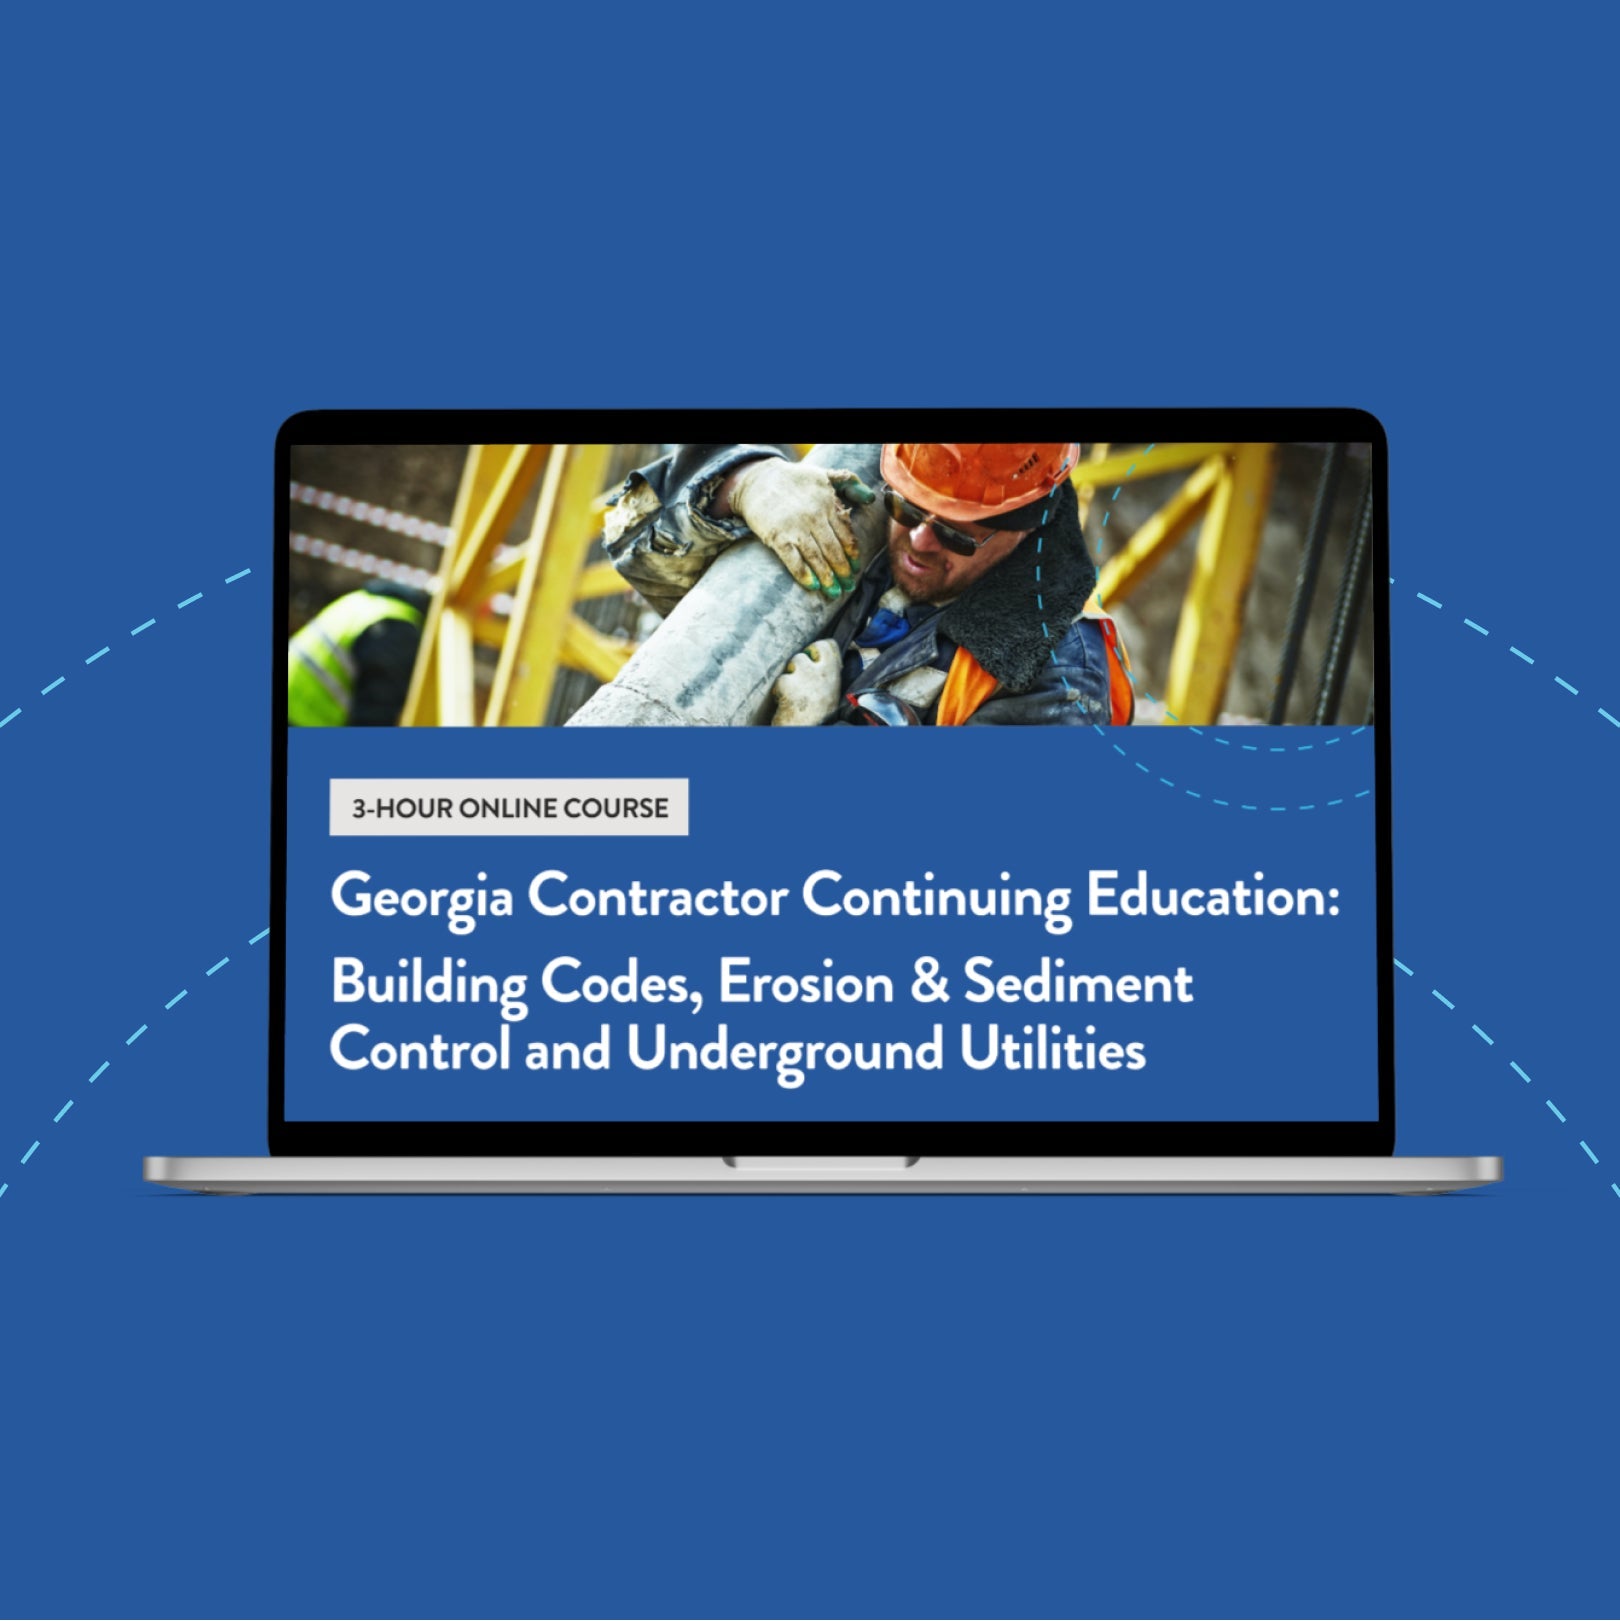 Georgia Contractor Continuing Education: Building Codes, Erosion & Sediment Control and Underground Utilities - 3-Hour Online Course